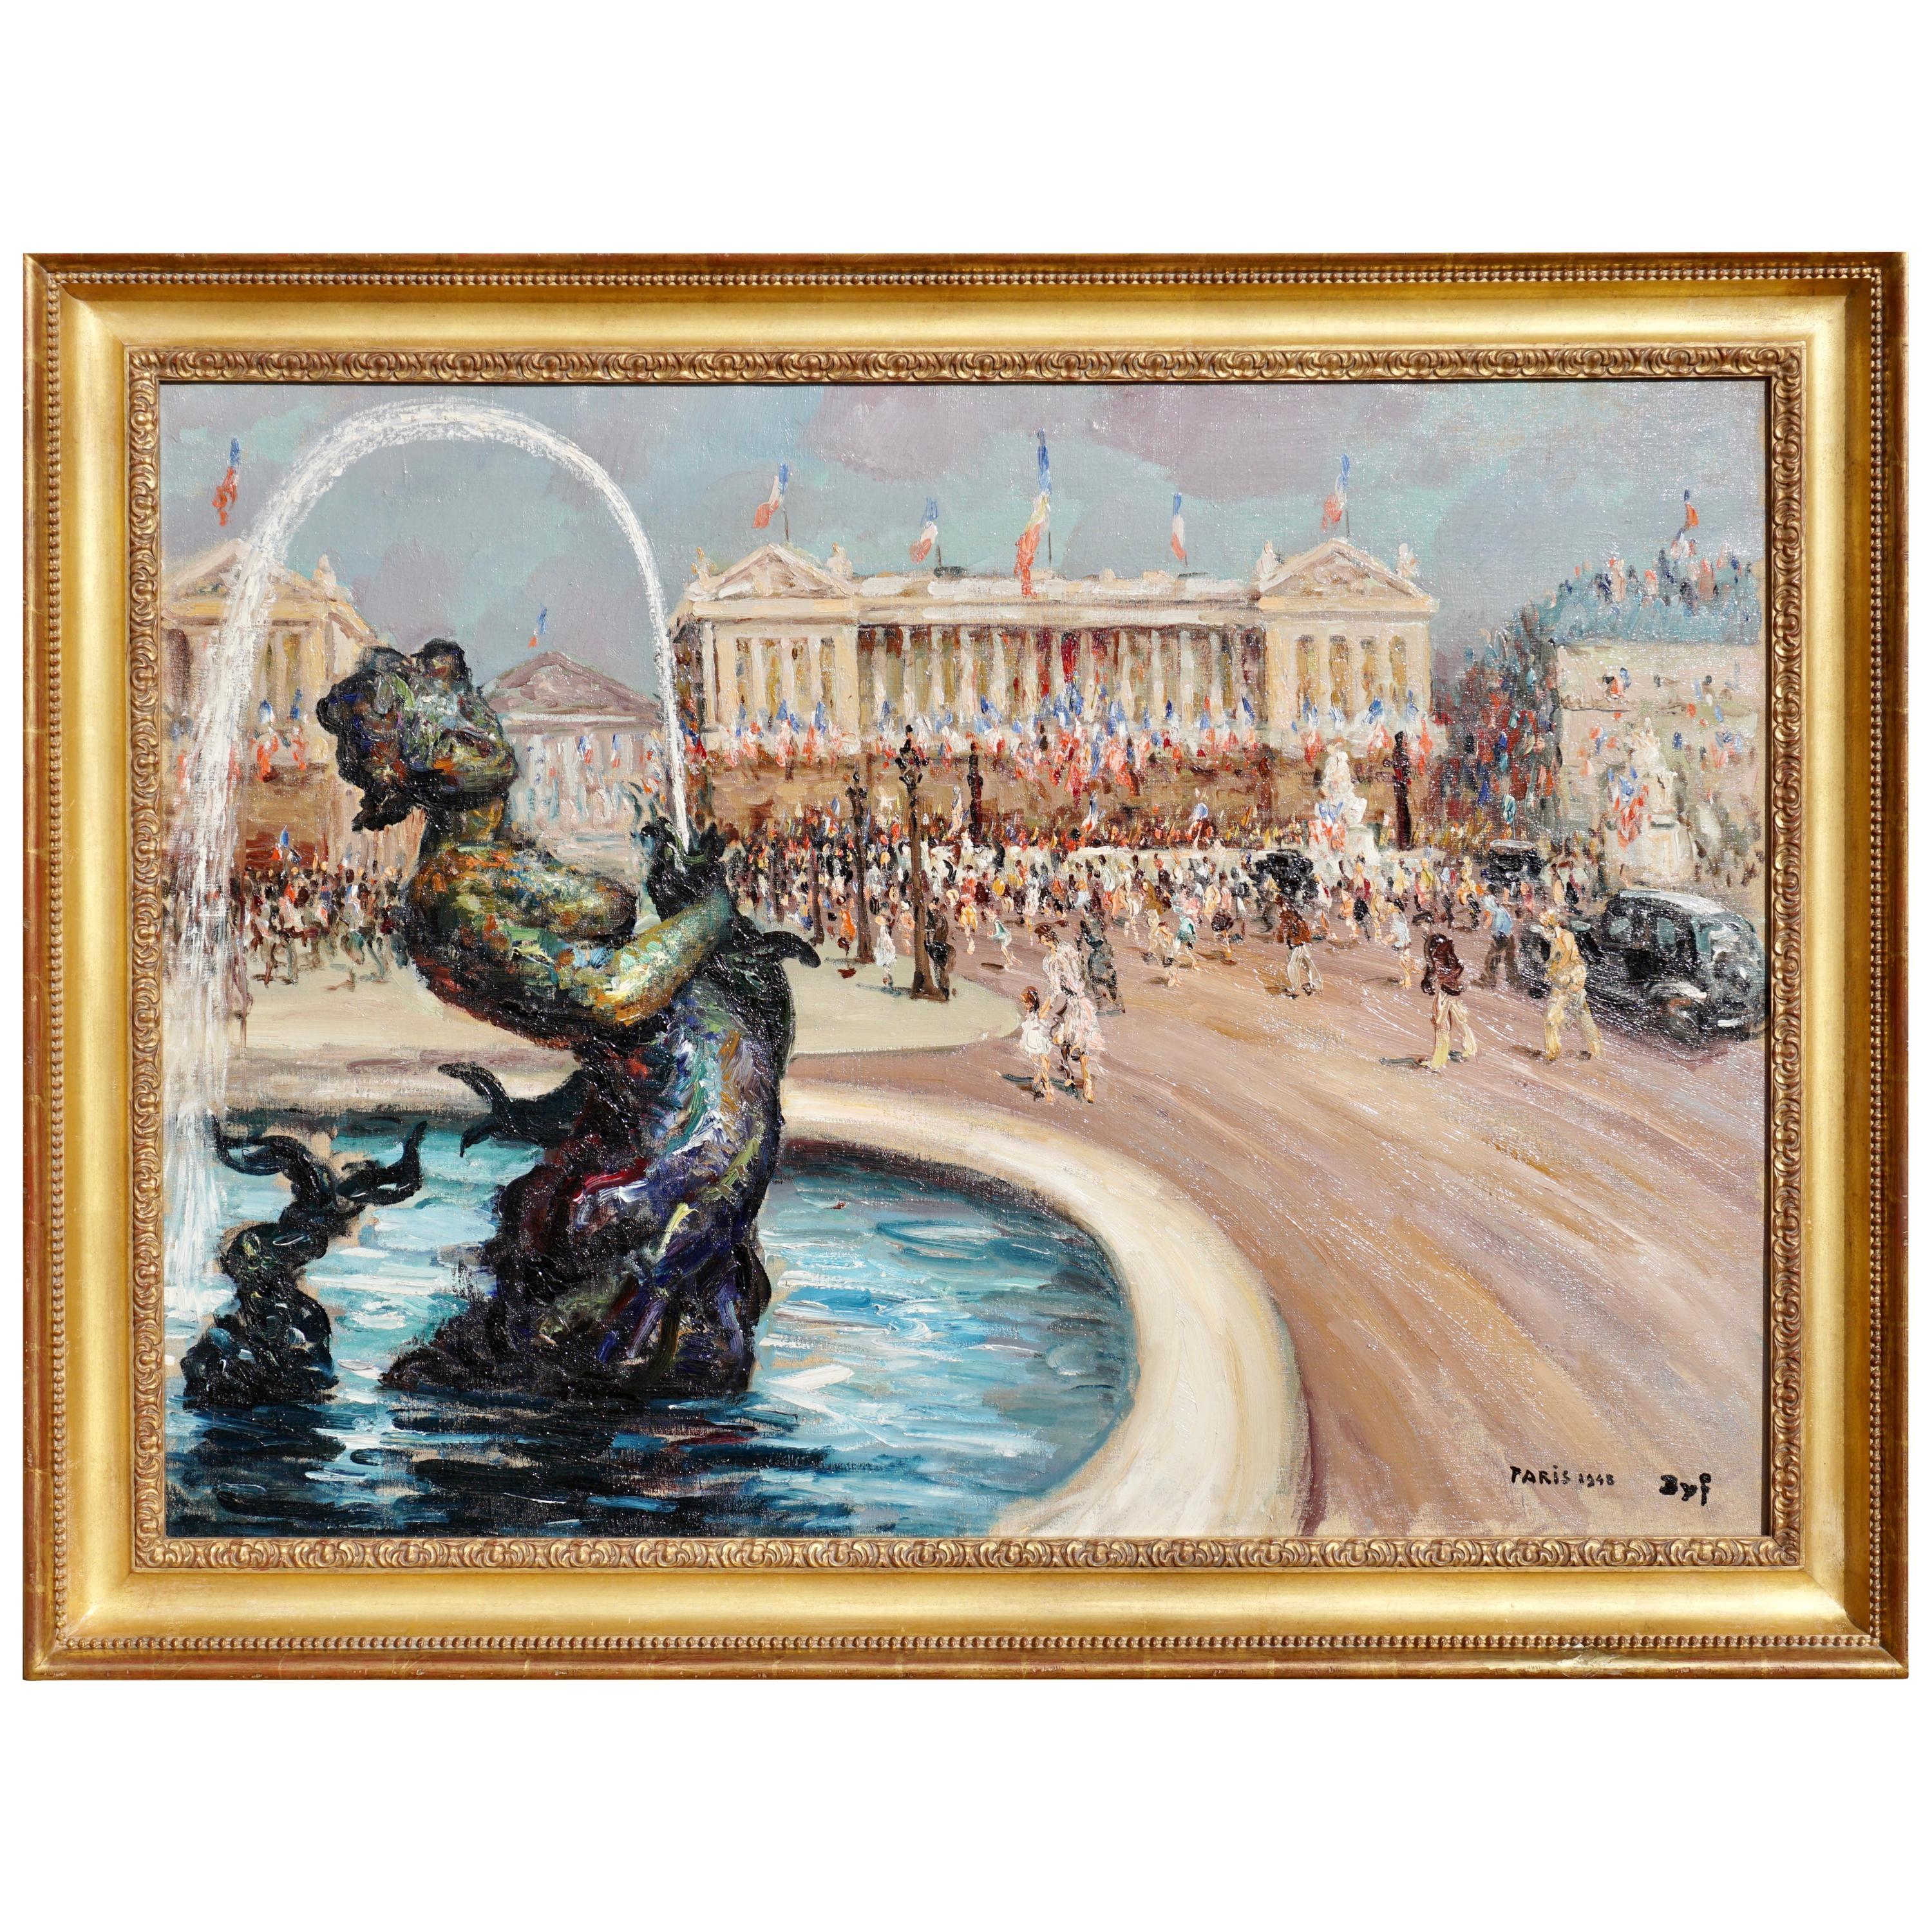 Marcel Dyf
French, 1899-1985 
“Place de La Concorde” , 1948 
Signed Dyf and dated 1948 Paris (lr) 
Oil on canvas 
Canvas: 29 x 39.75 Inches (73.6 x 99 cm) 
Framed: 35 x 45.25 Inches

This larger than life oil on canvas original Dyf painting is rare